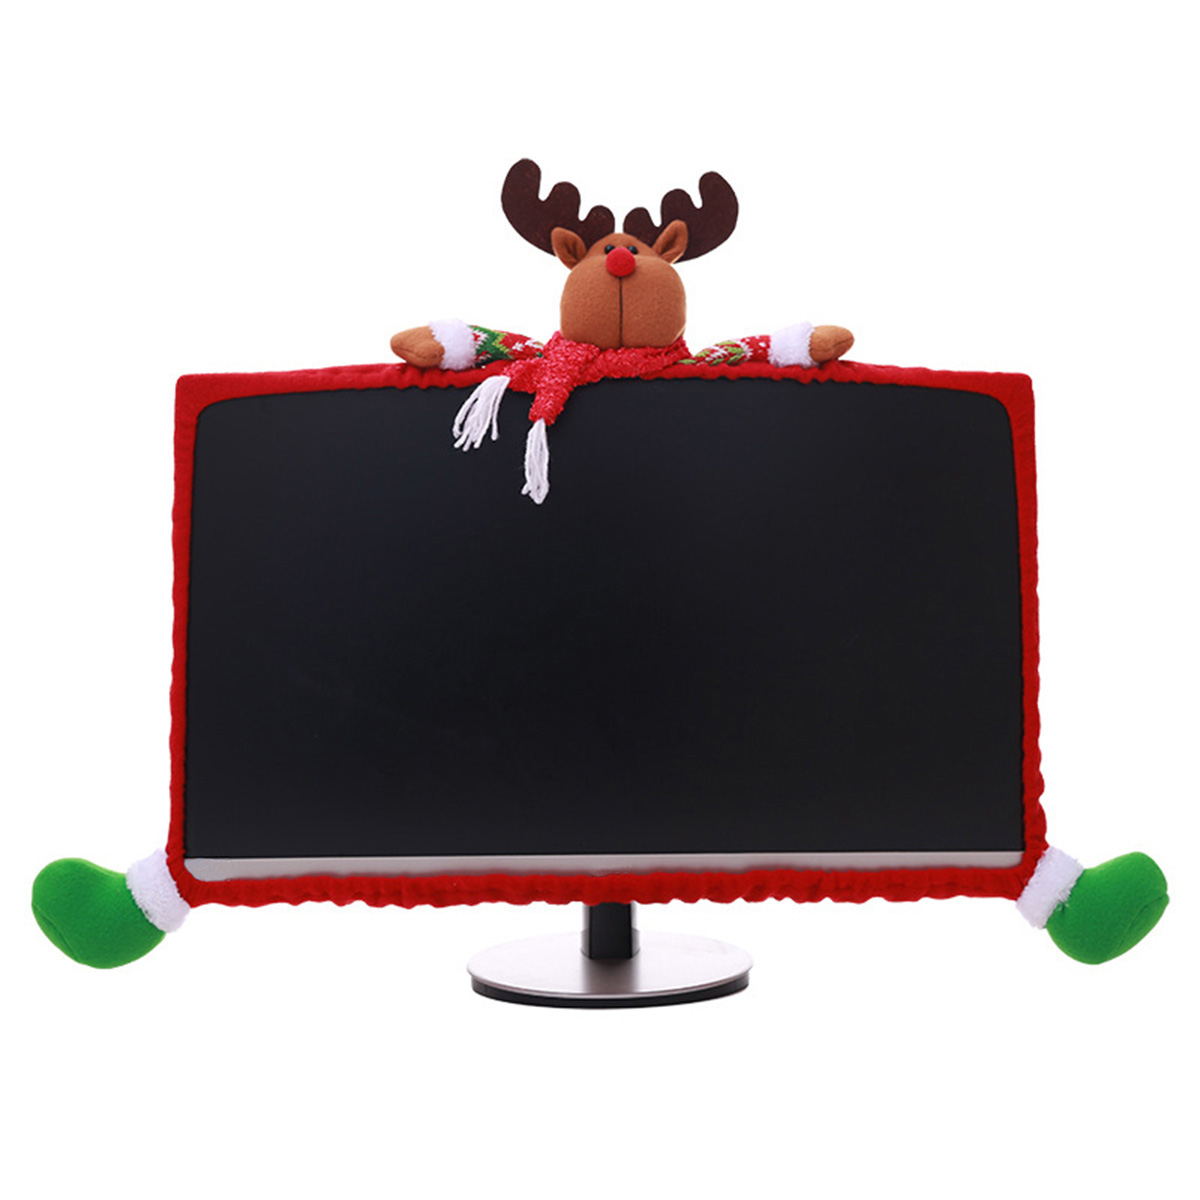 3-Style-Christmas-Computer-Laptop-LCD-Screen-Monitor-Decor-Cover-Suit-19-27quot-1376081-6